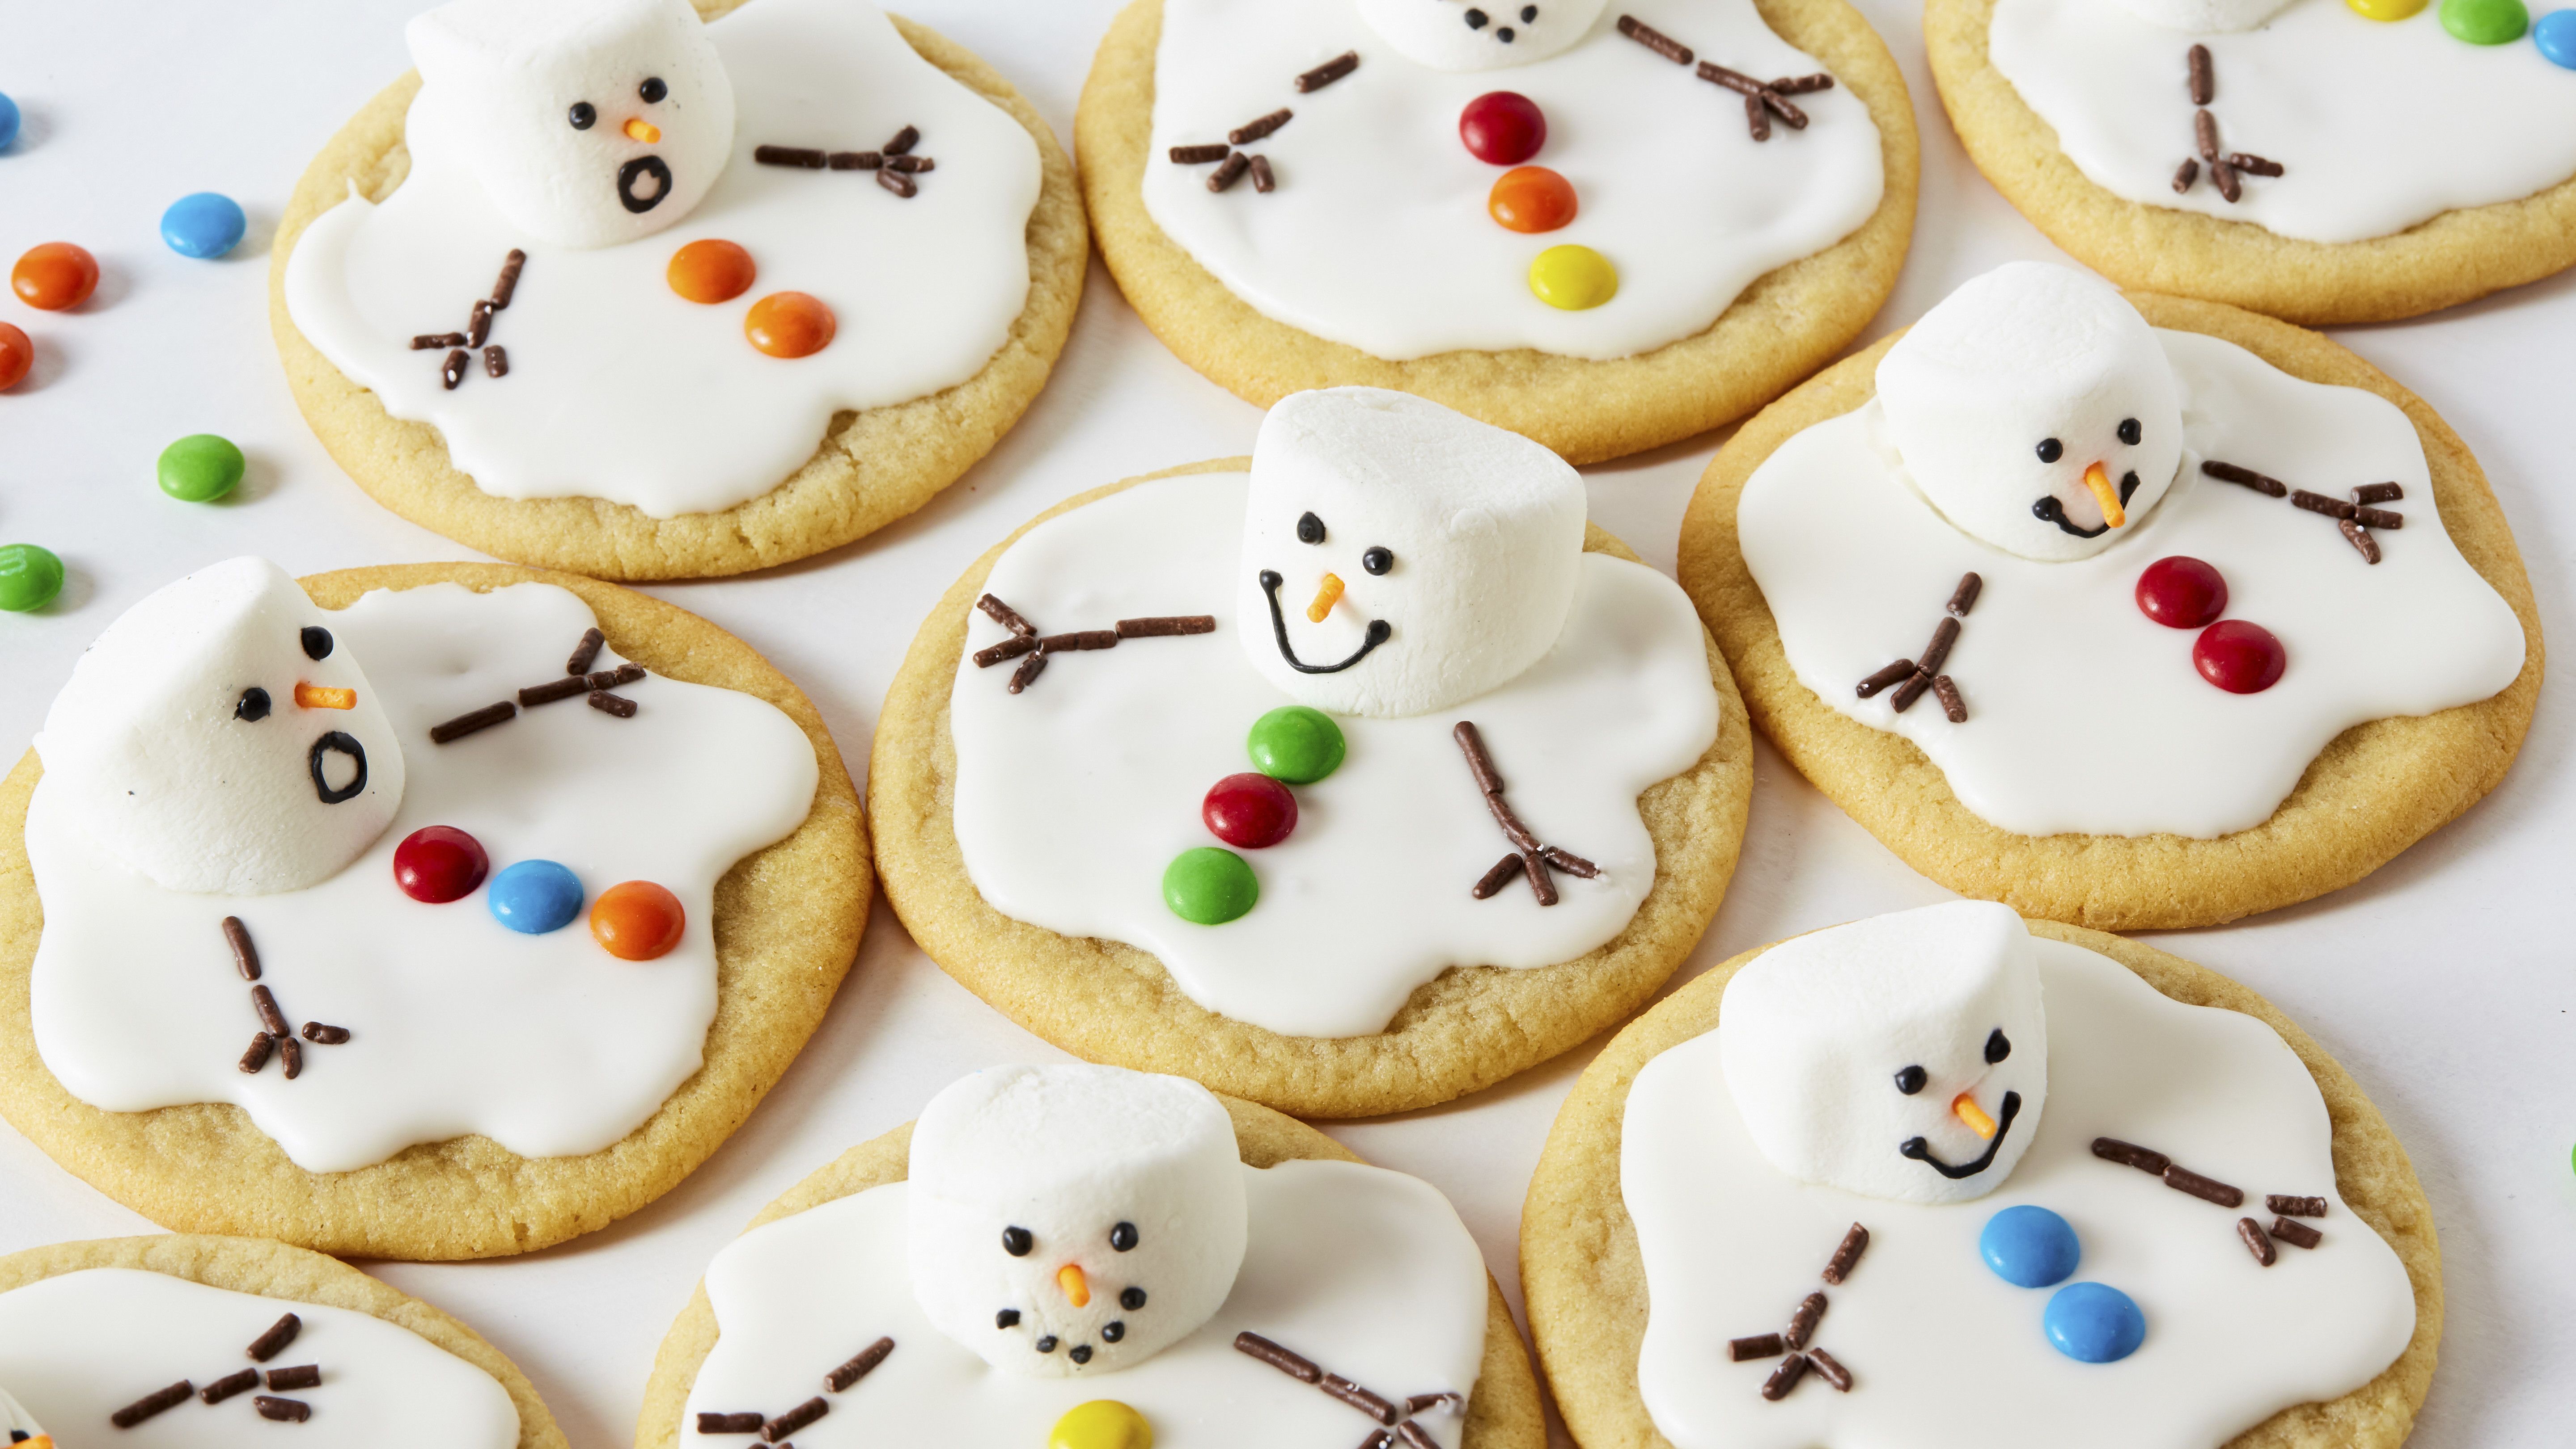 Do you want to build a snowman? Cookie Set